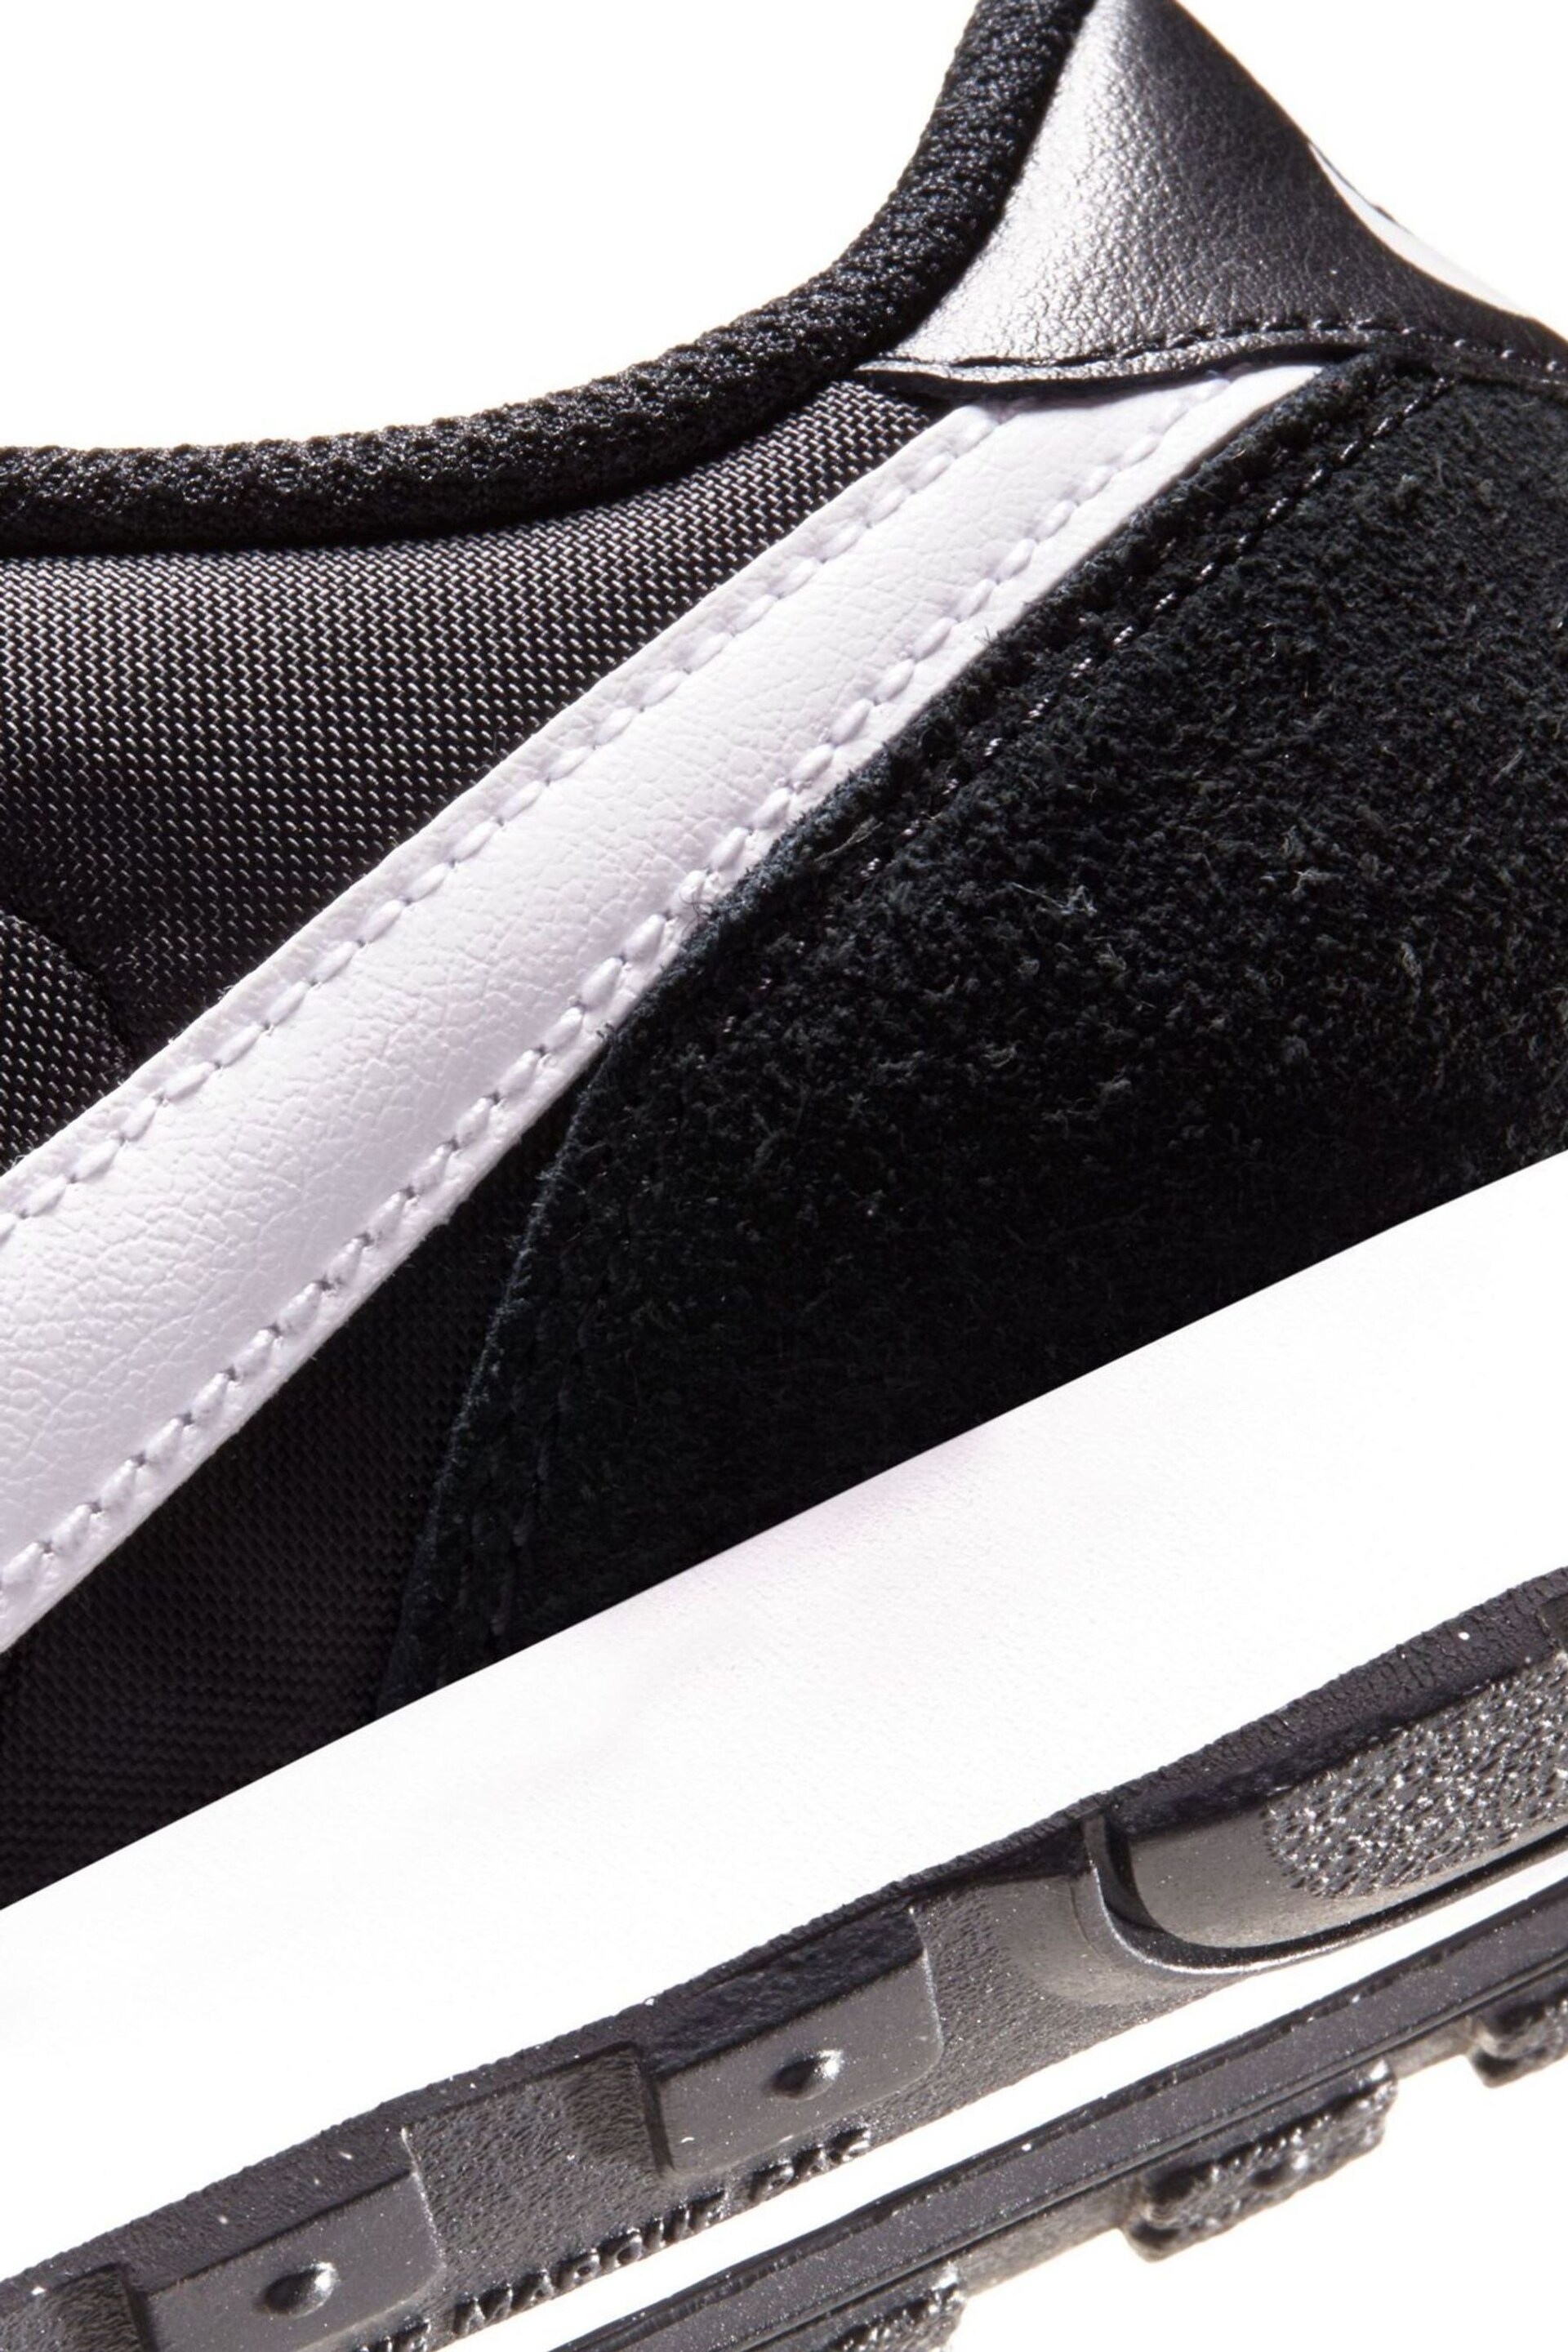 Nike Black/White Youth MD Valiant Trainers - Image 9 of 10